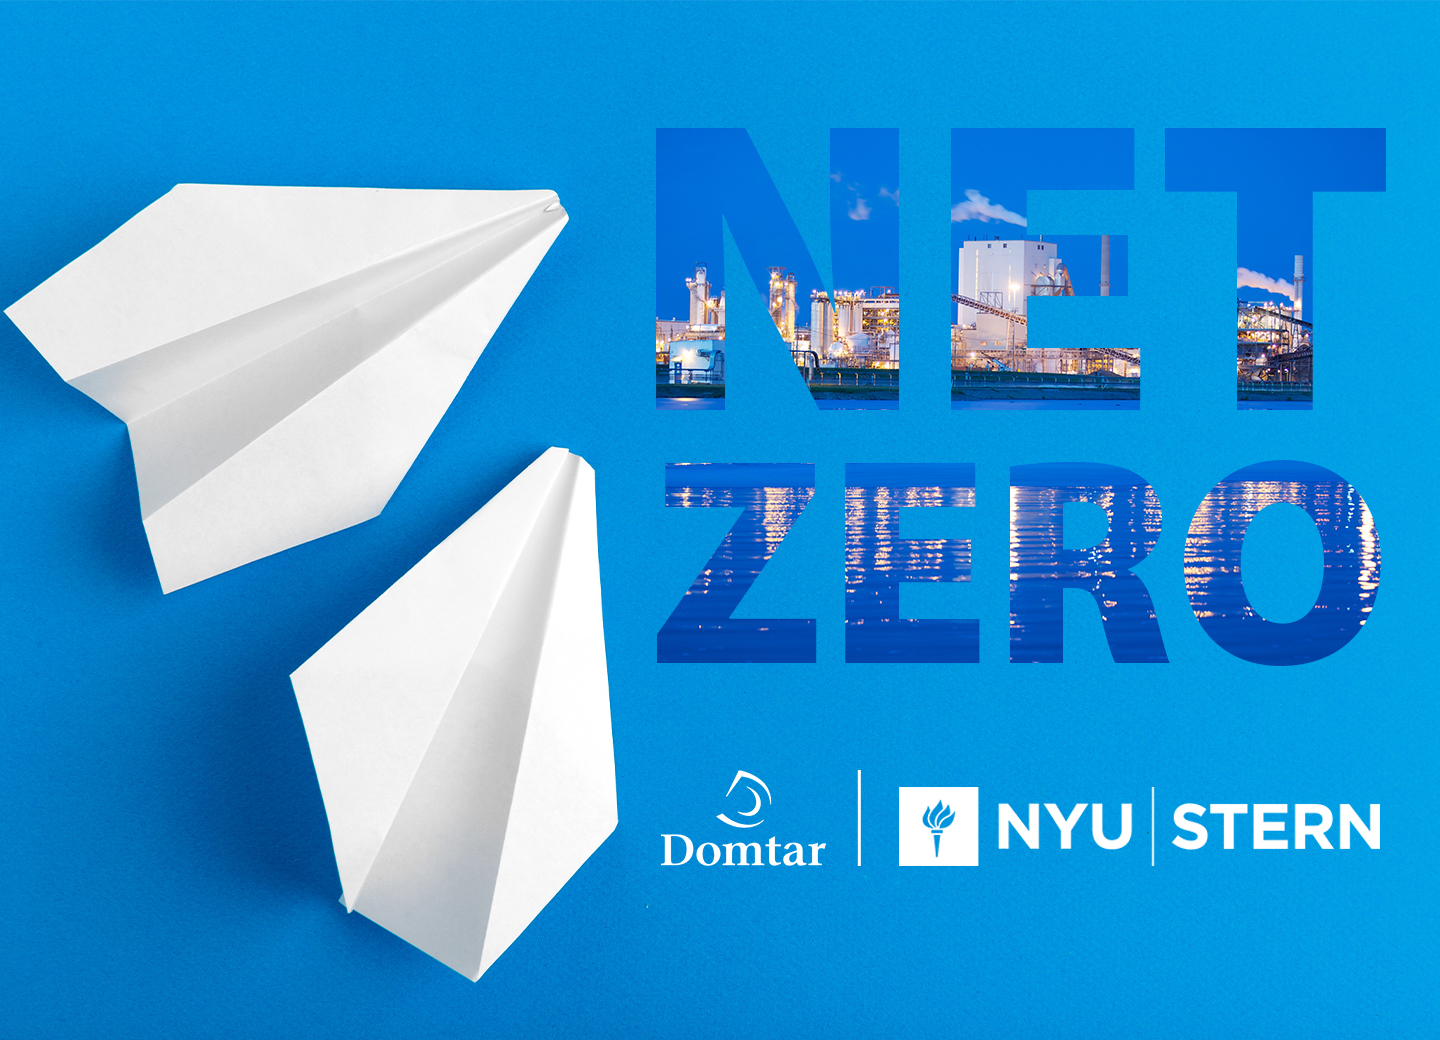 Net zero project with Domtar and NYU Stern